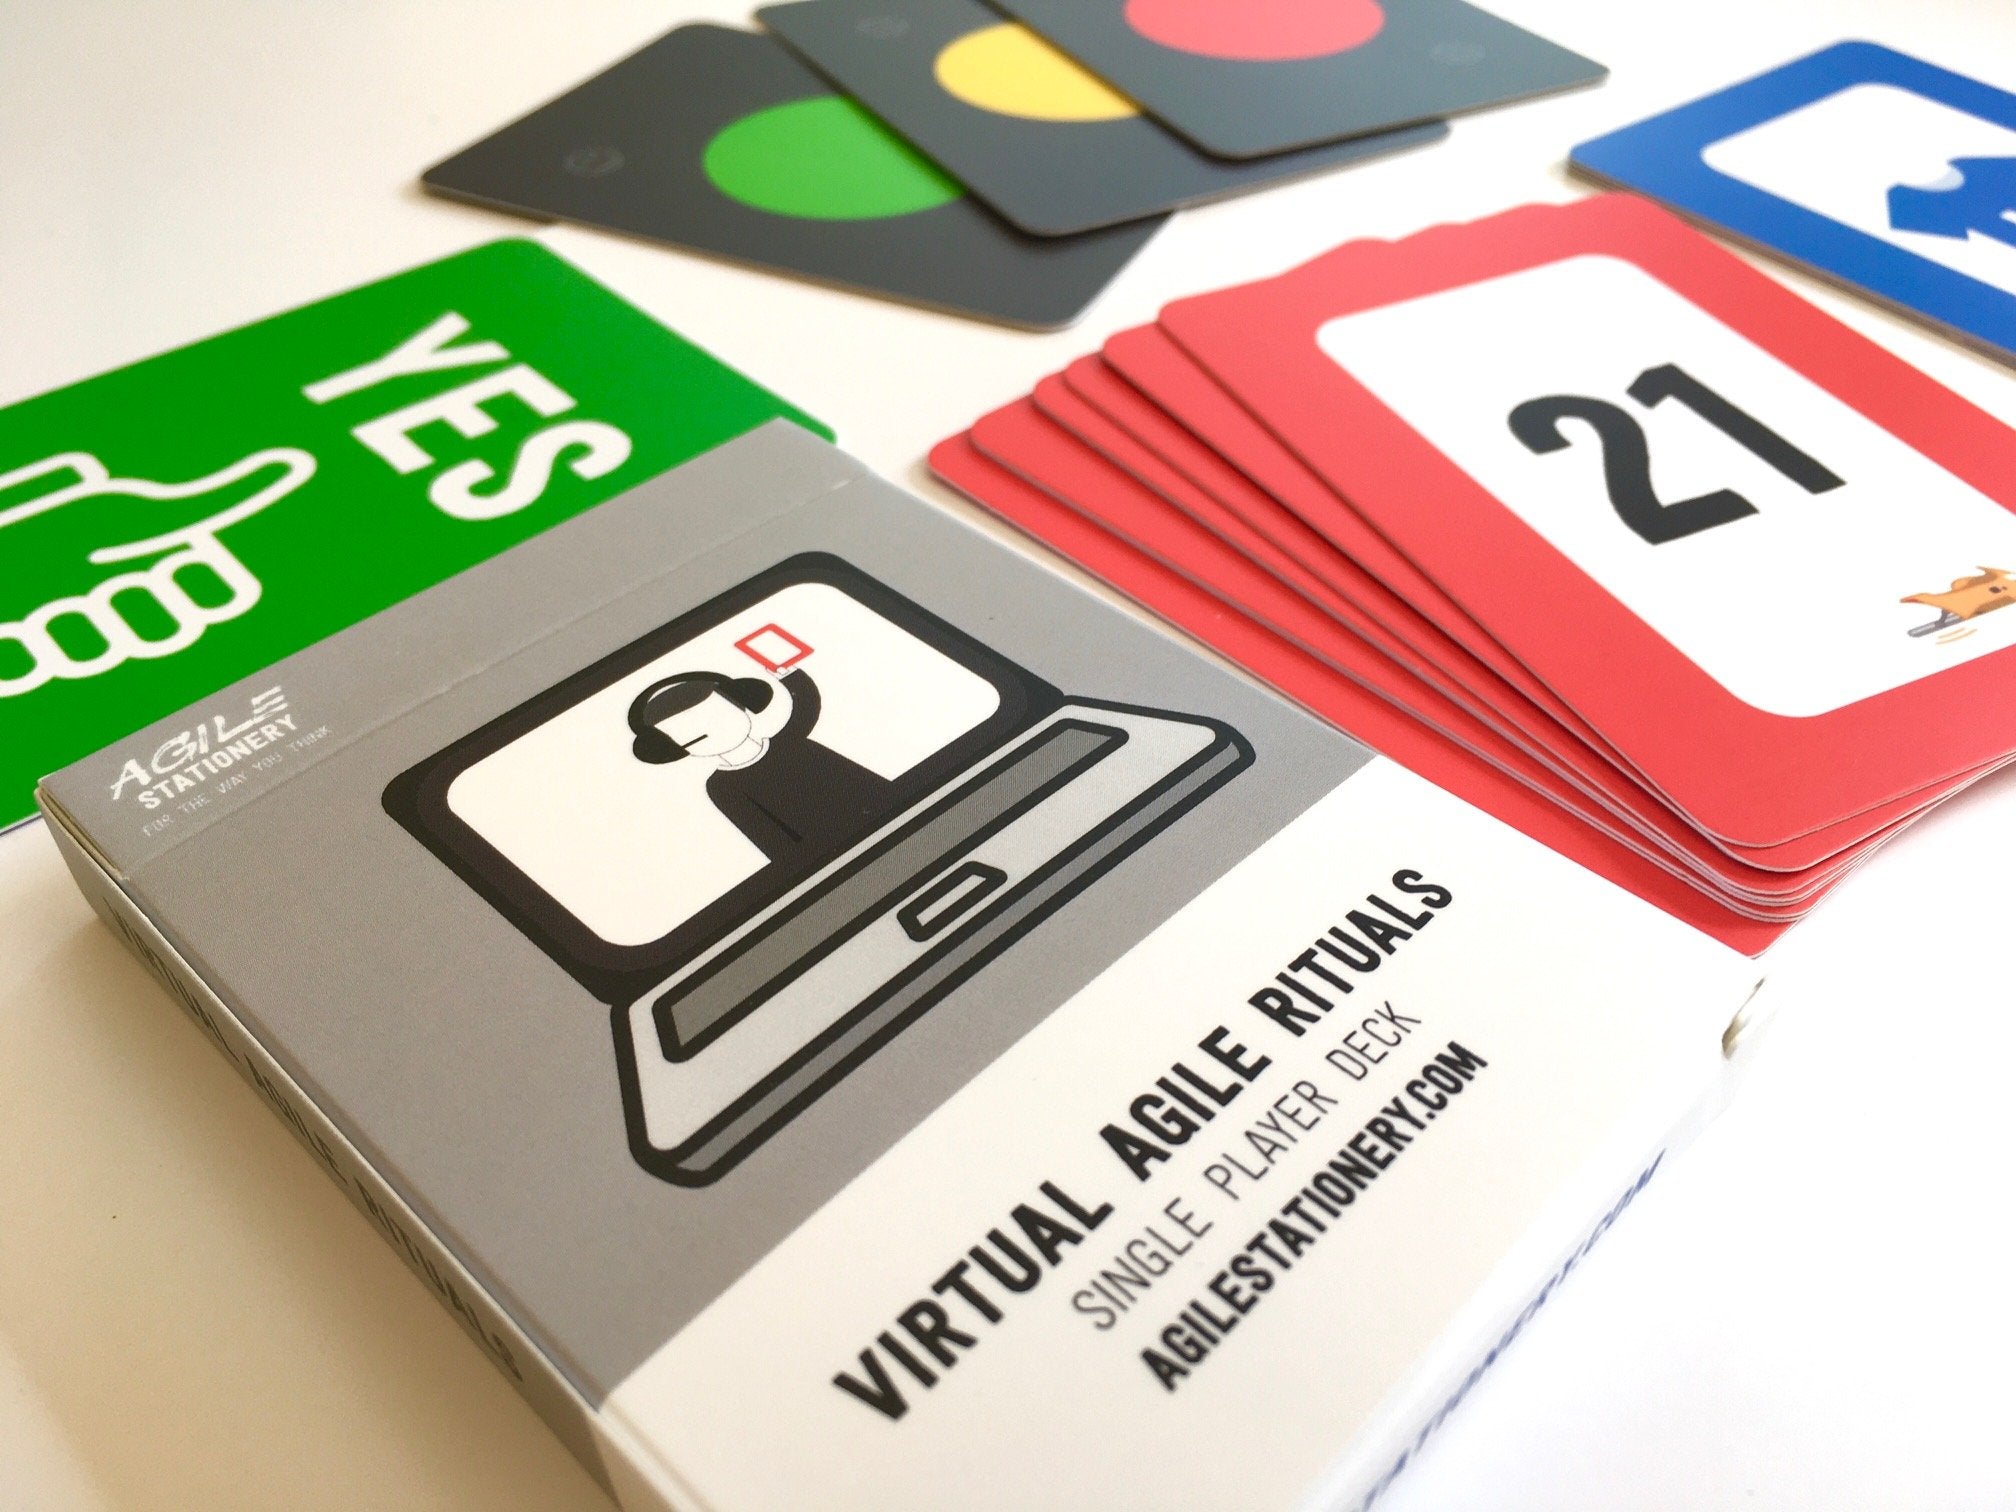 Estimation Poker and Agile Ritual Cards for Remote Workers (with Video Conference cards)